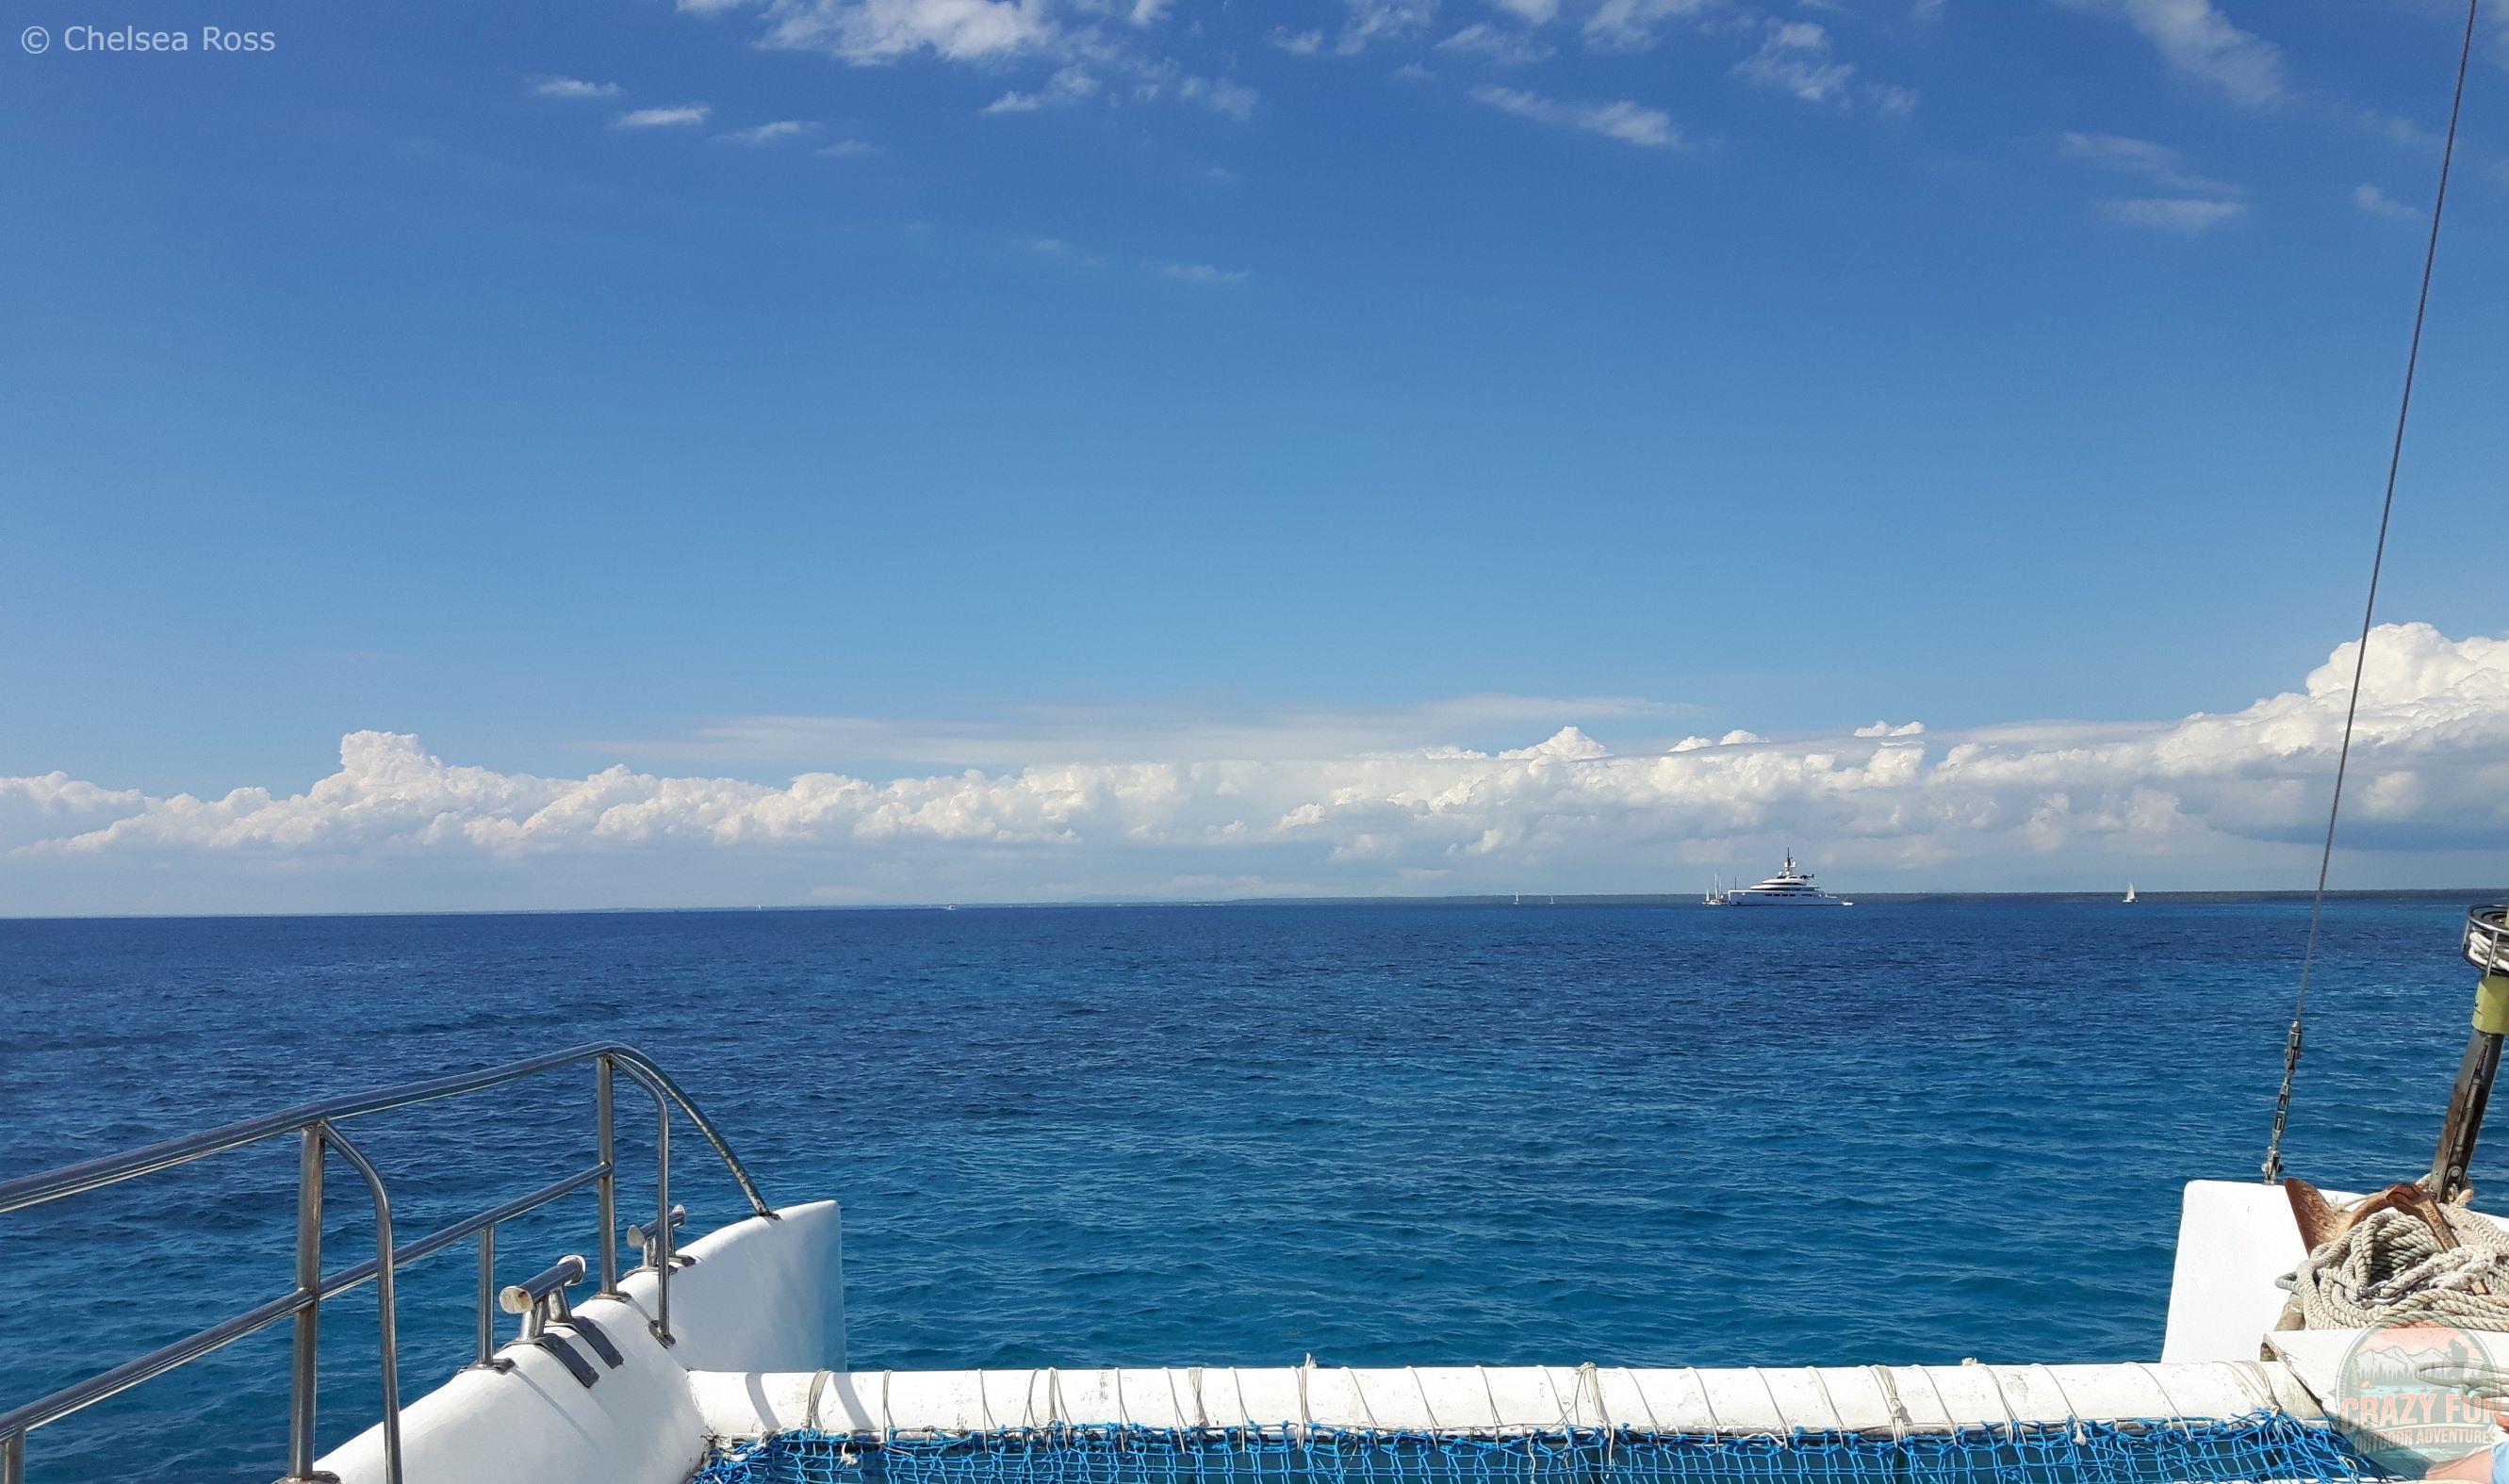 Top 10 Activities from Majestic Resorts: catamaran experience is next. Showing the edge of the catamaran with the blue ocean in front of us and clouds in the distance.